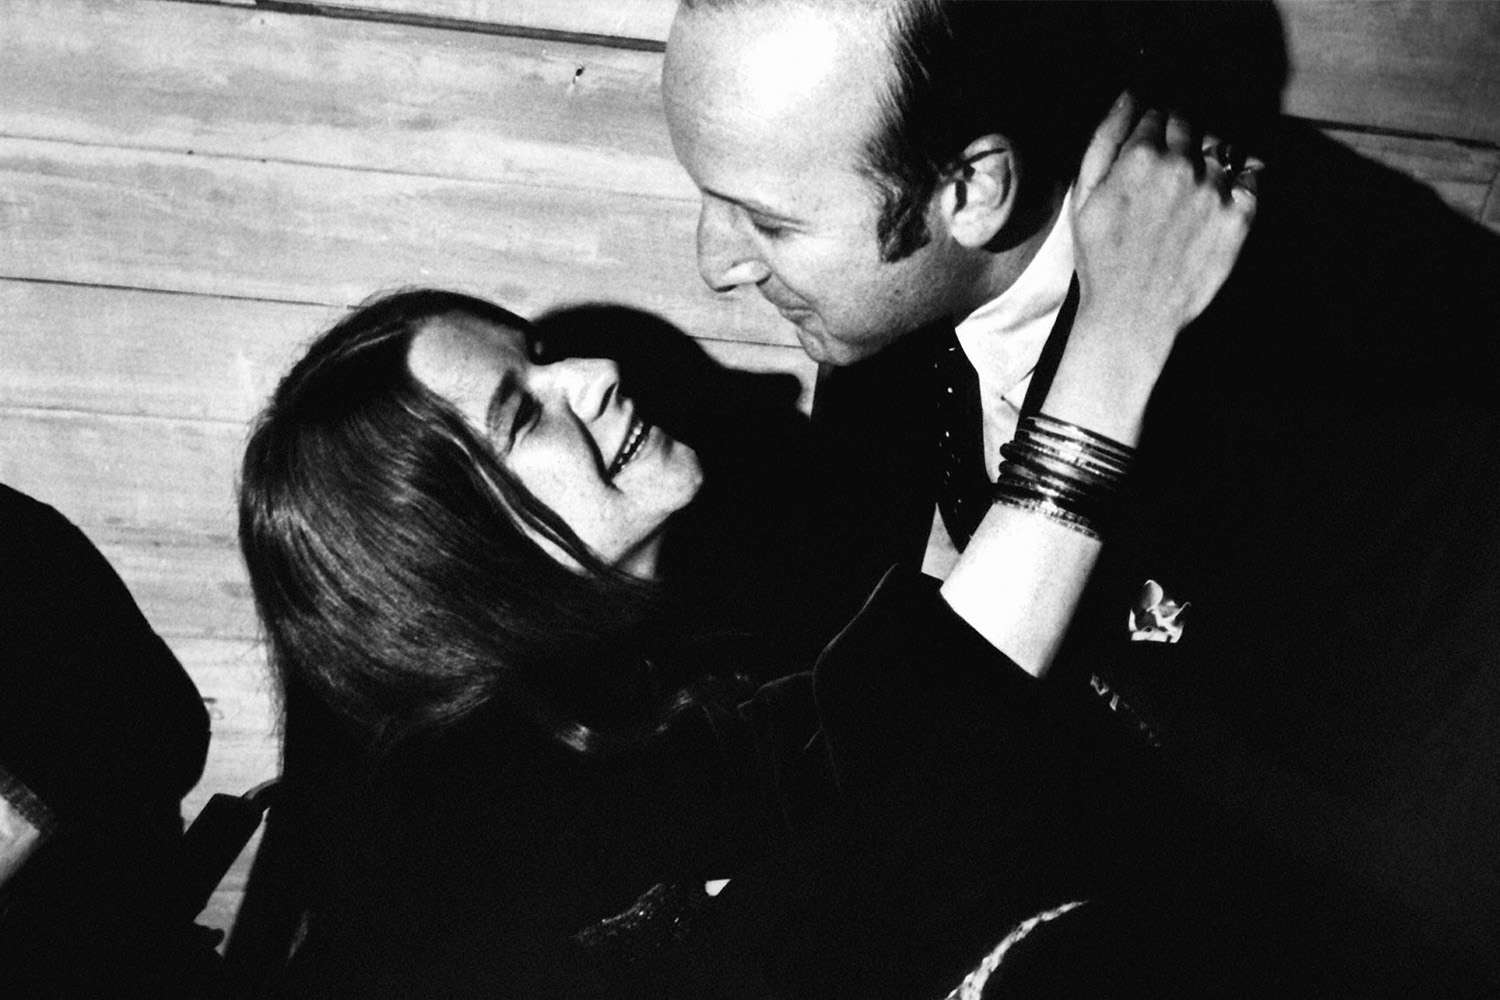 UNITED STATES - JANUARY 01: Photo of Clive DAVIS and Janis JOPLIN; with Clive Davis, President of CBS Records (Photo by Elliott Landy/Redferns)